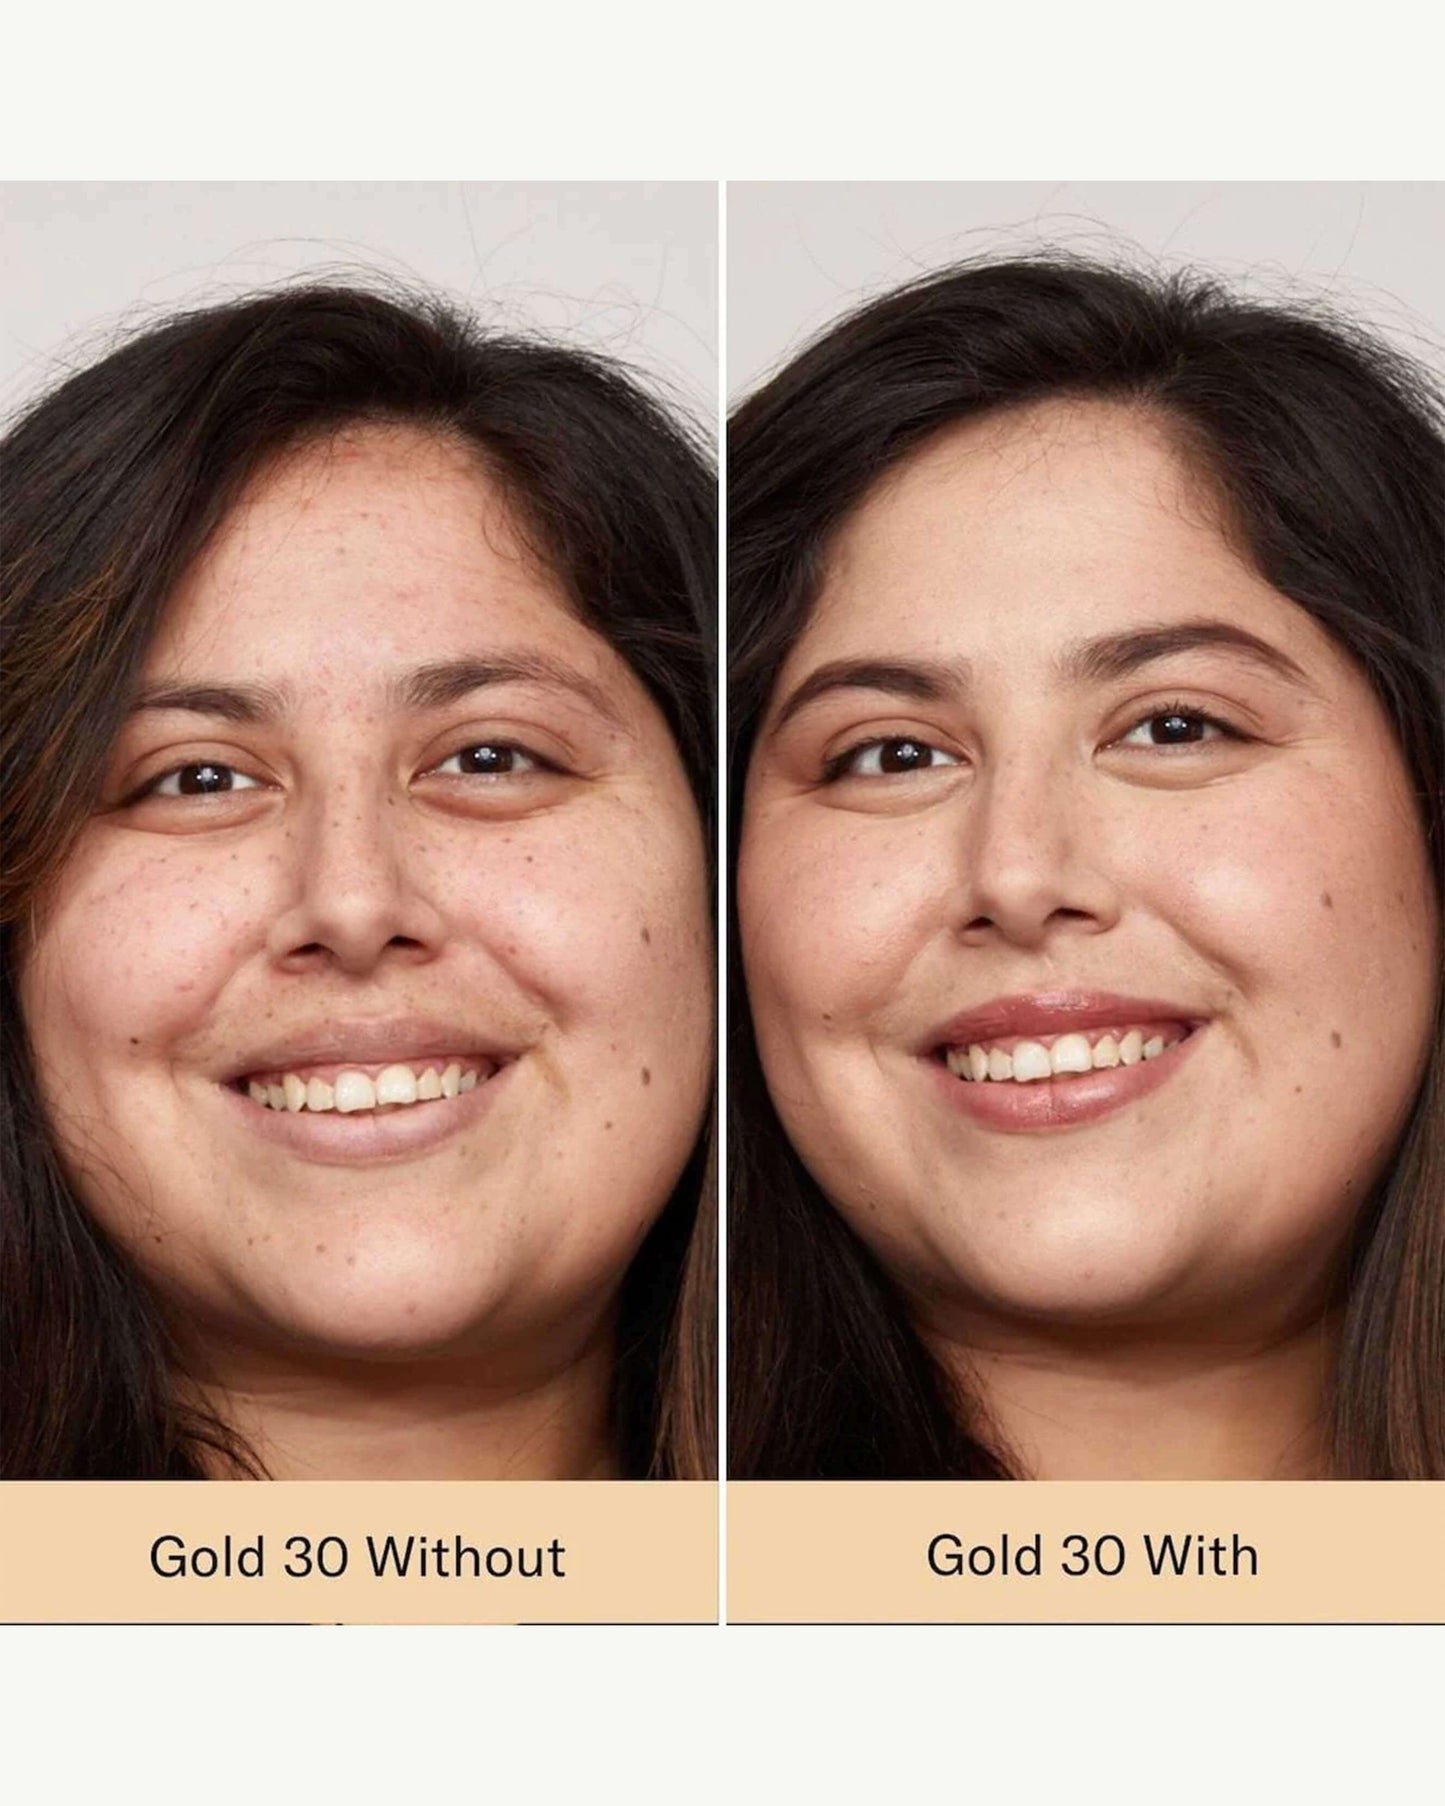 Gold 30 (light with gold undertones)